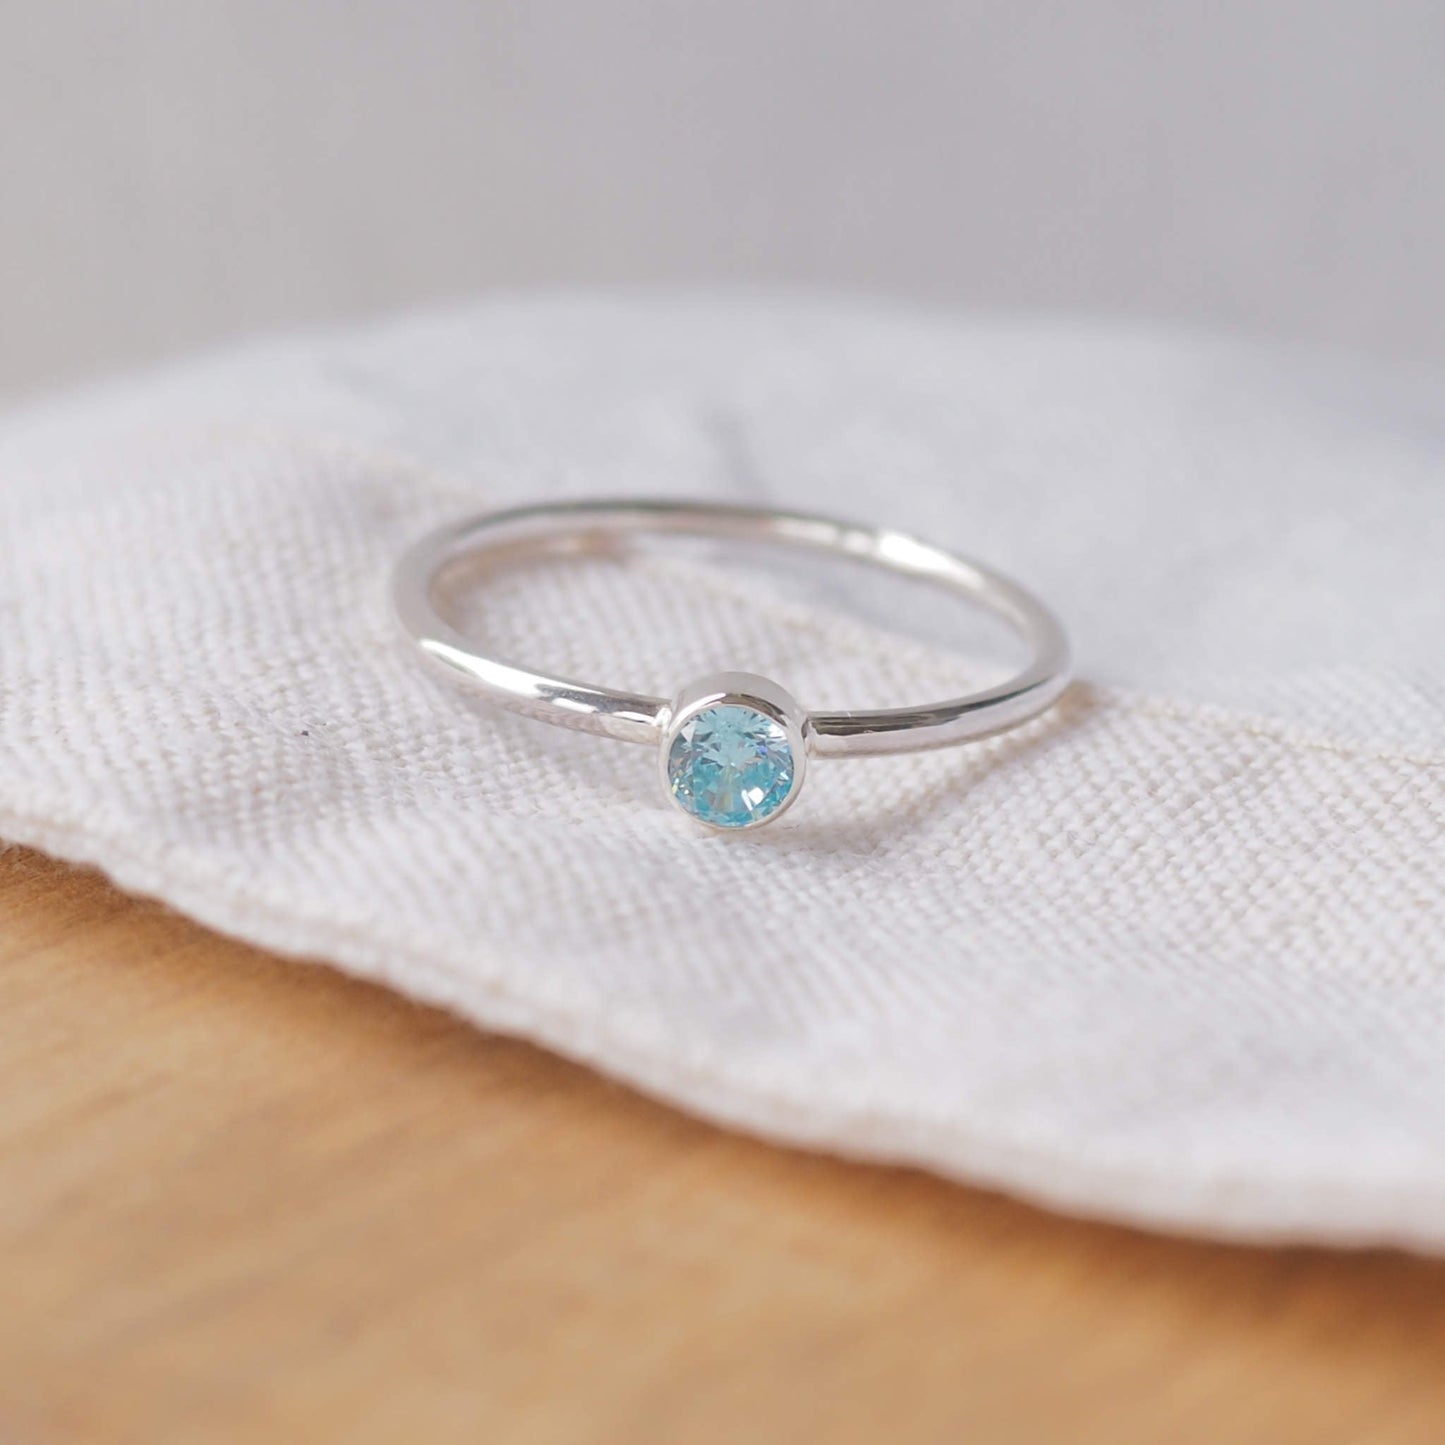 Silver ring with a light aqua gemstone. The ring is simple in style with no embellishment , with a round wire band 1.5mm thick with a simple Pale Blue Aquamarine 4mm round cubic zirconia stone set in an enclosed silver setting. Aquamarine is the birthstone for March. The ring is Sterling Silver and made to your ring size. Handmade in Scotland by Maram Jewellery